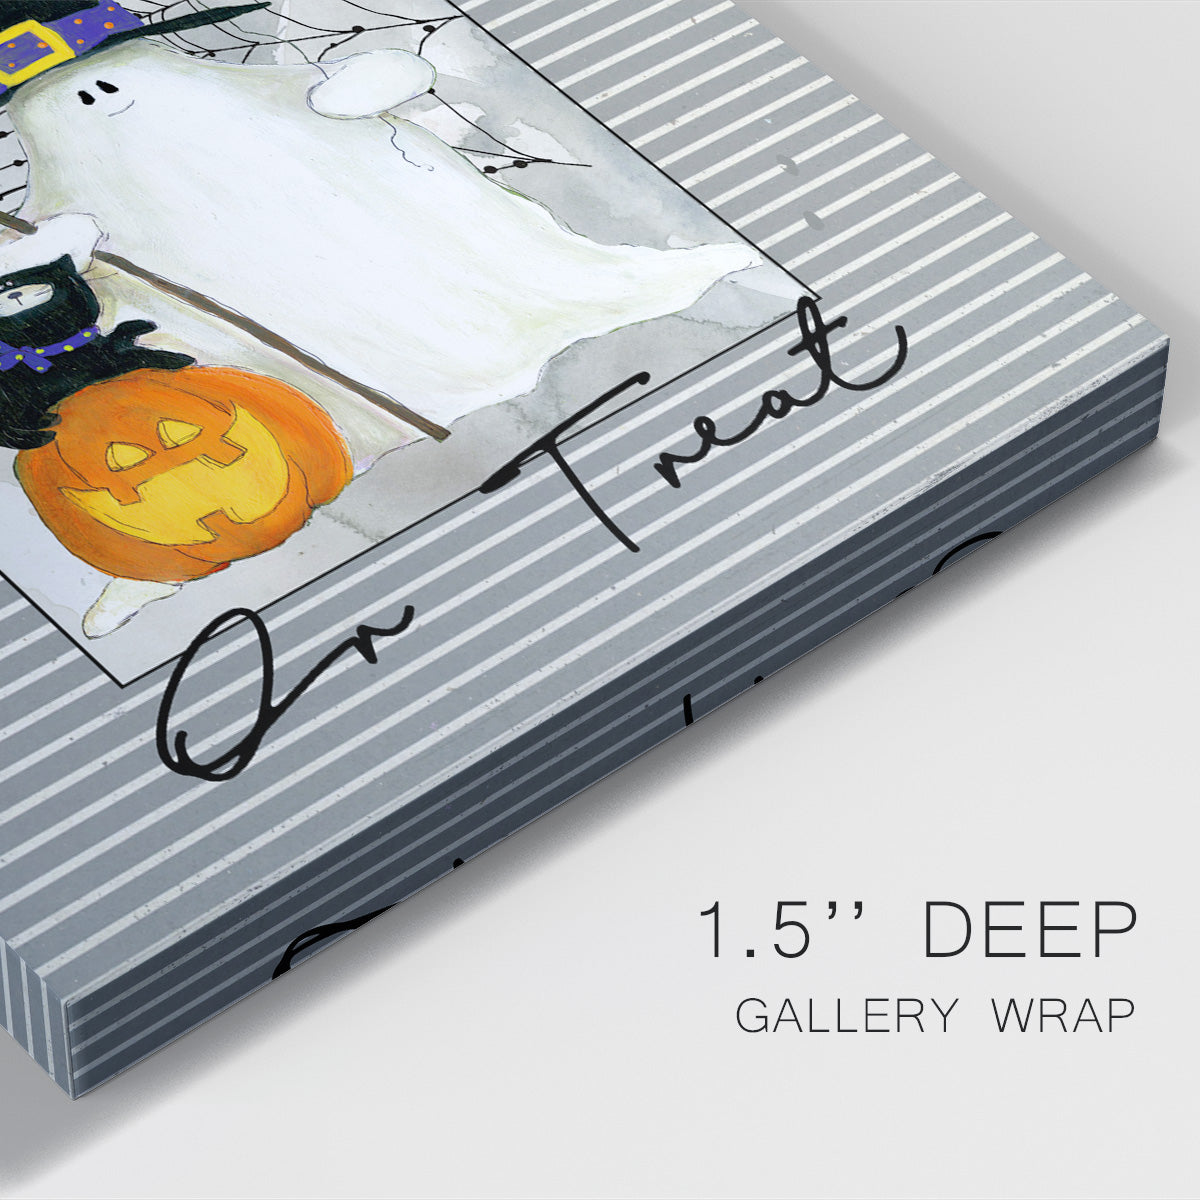 Trick or Treat Ghost Premium Gallery Wrapped Canvas - Ready to Hang